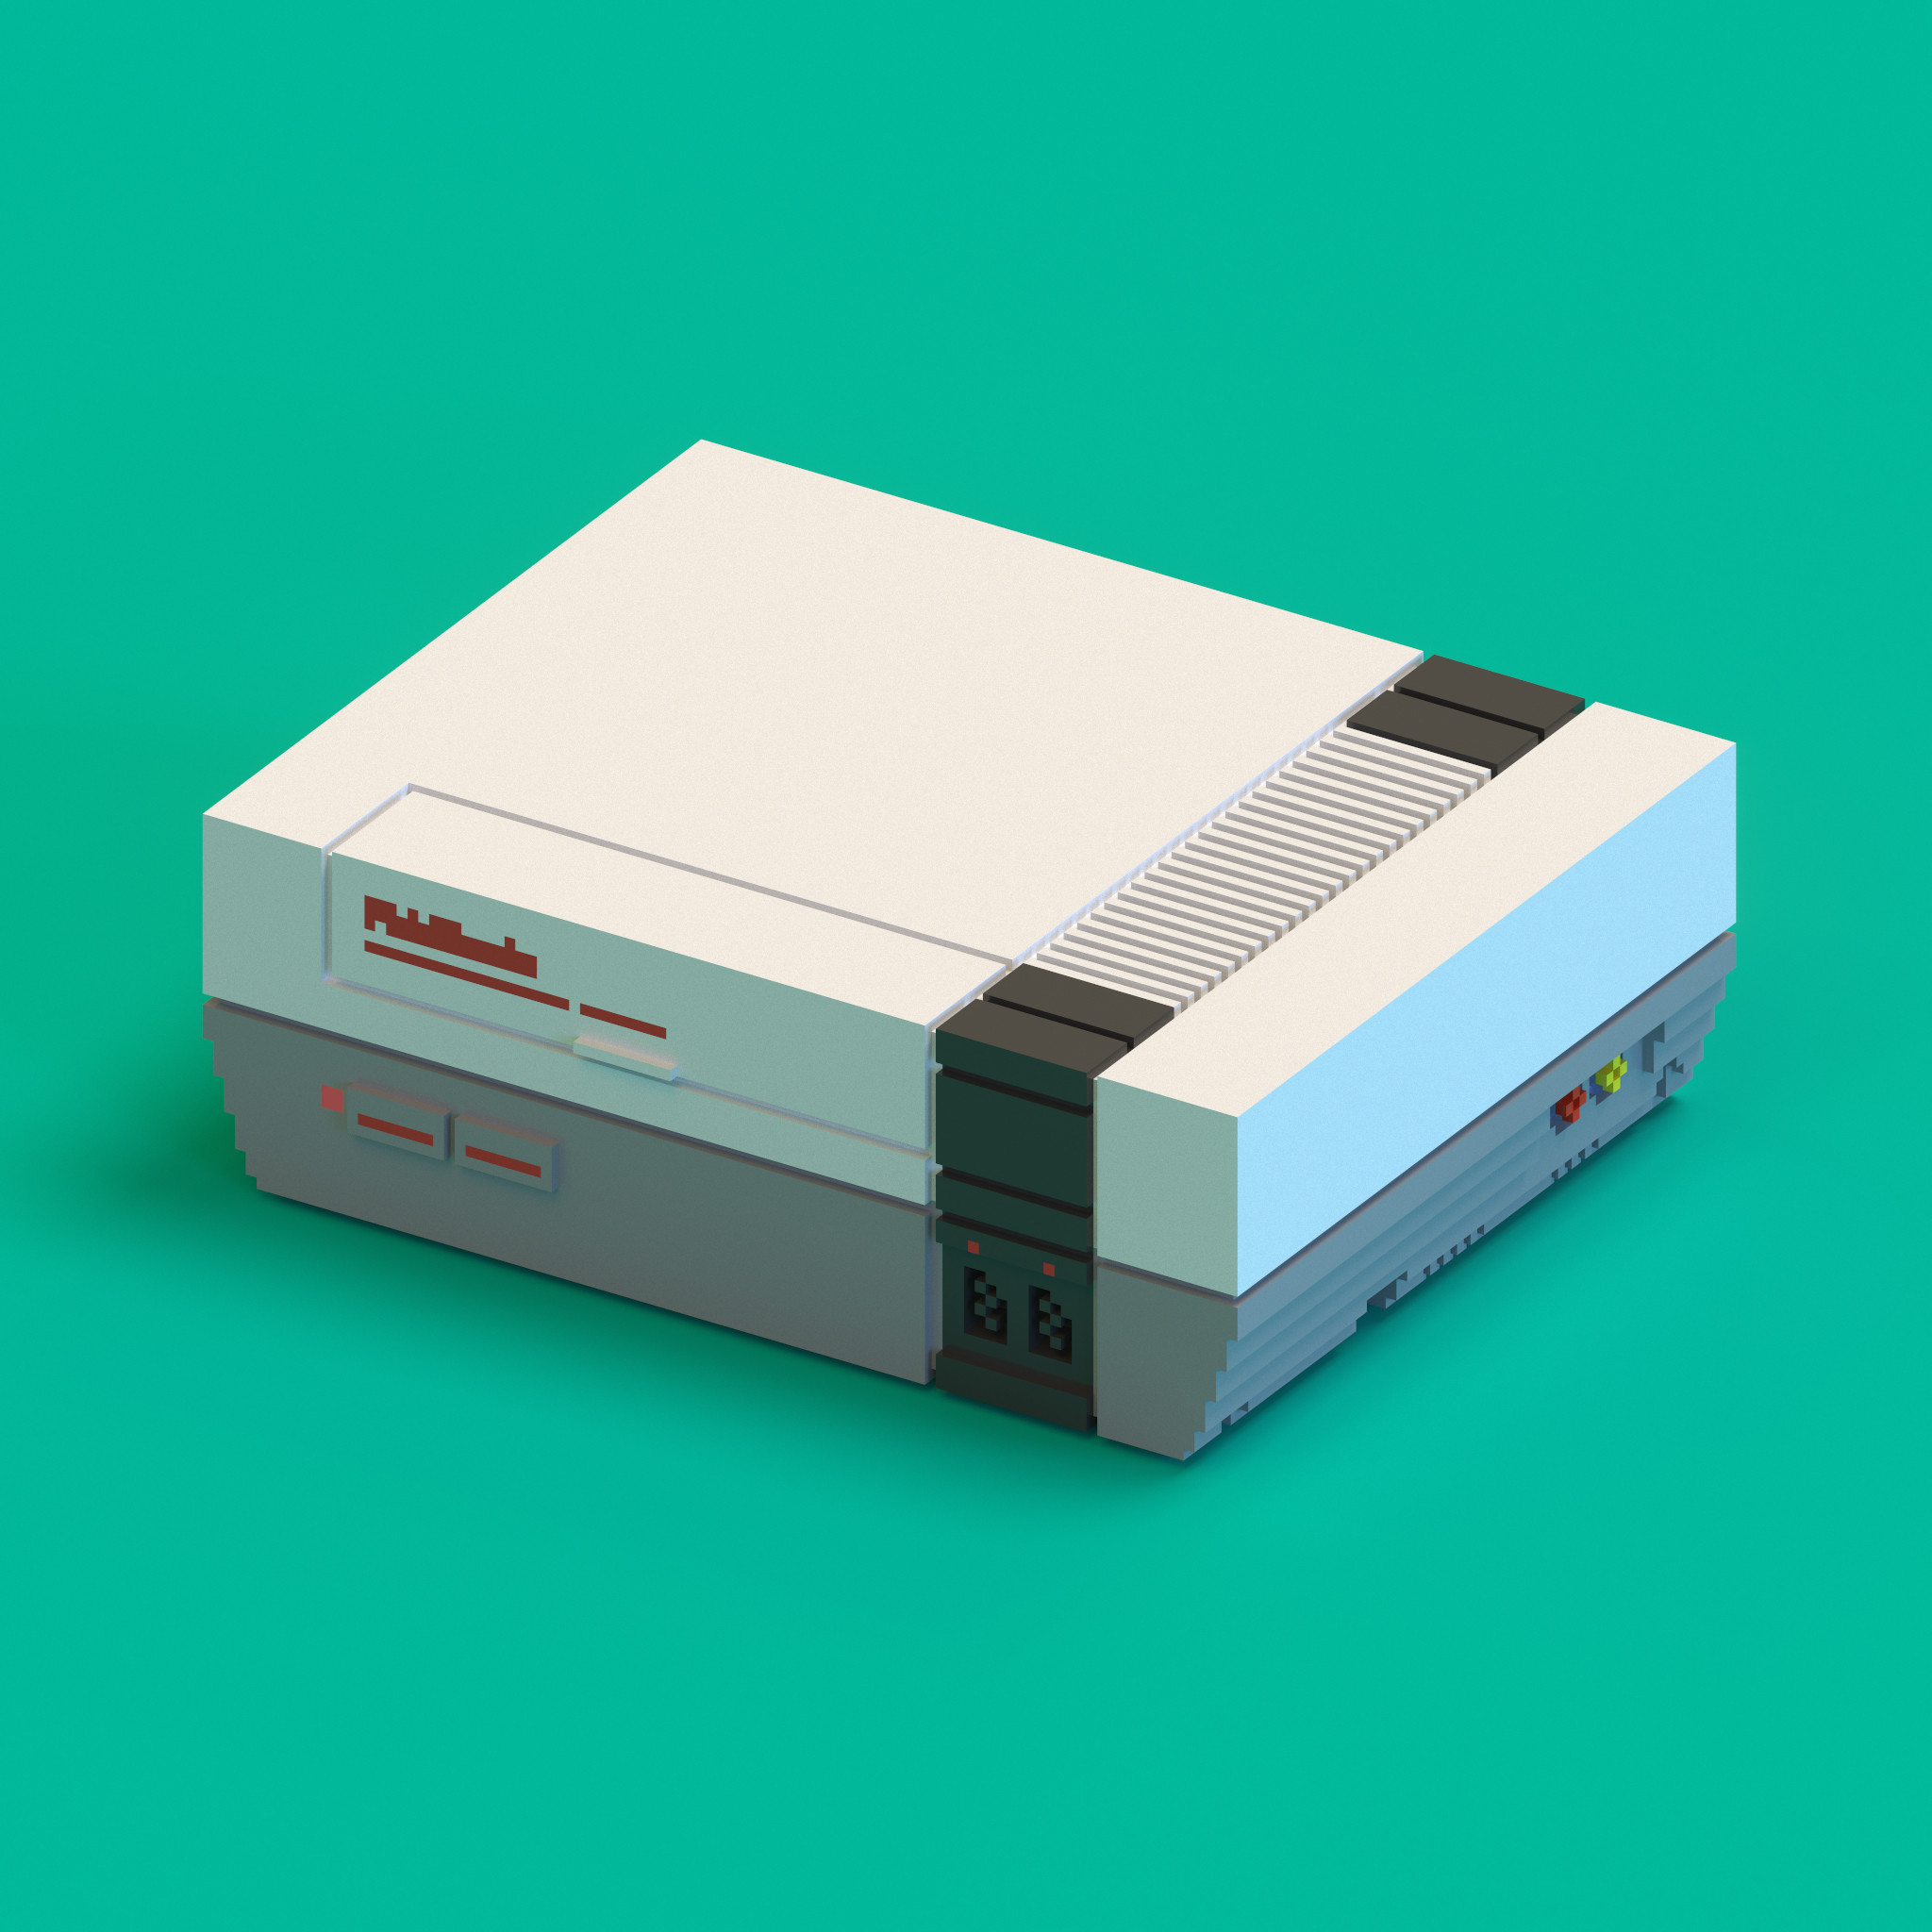 Voxel model rendering of the Nintendo Entertainment System (NES) videogame console.